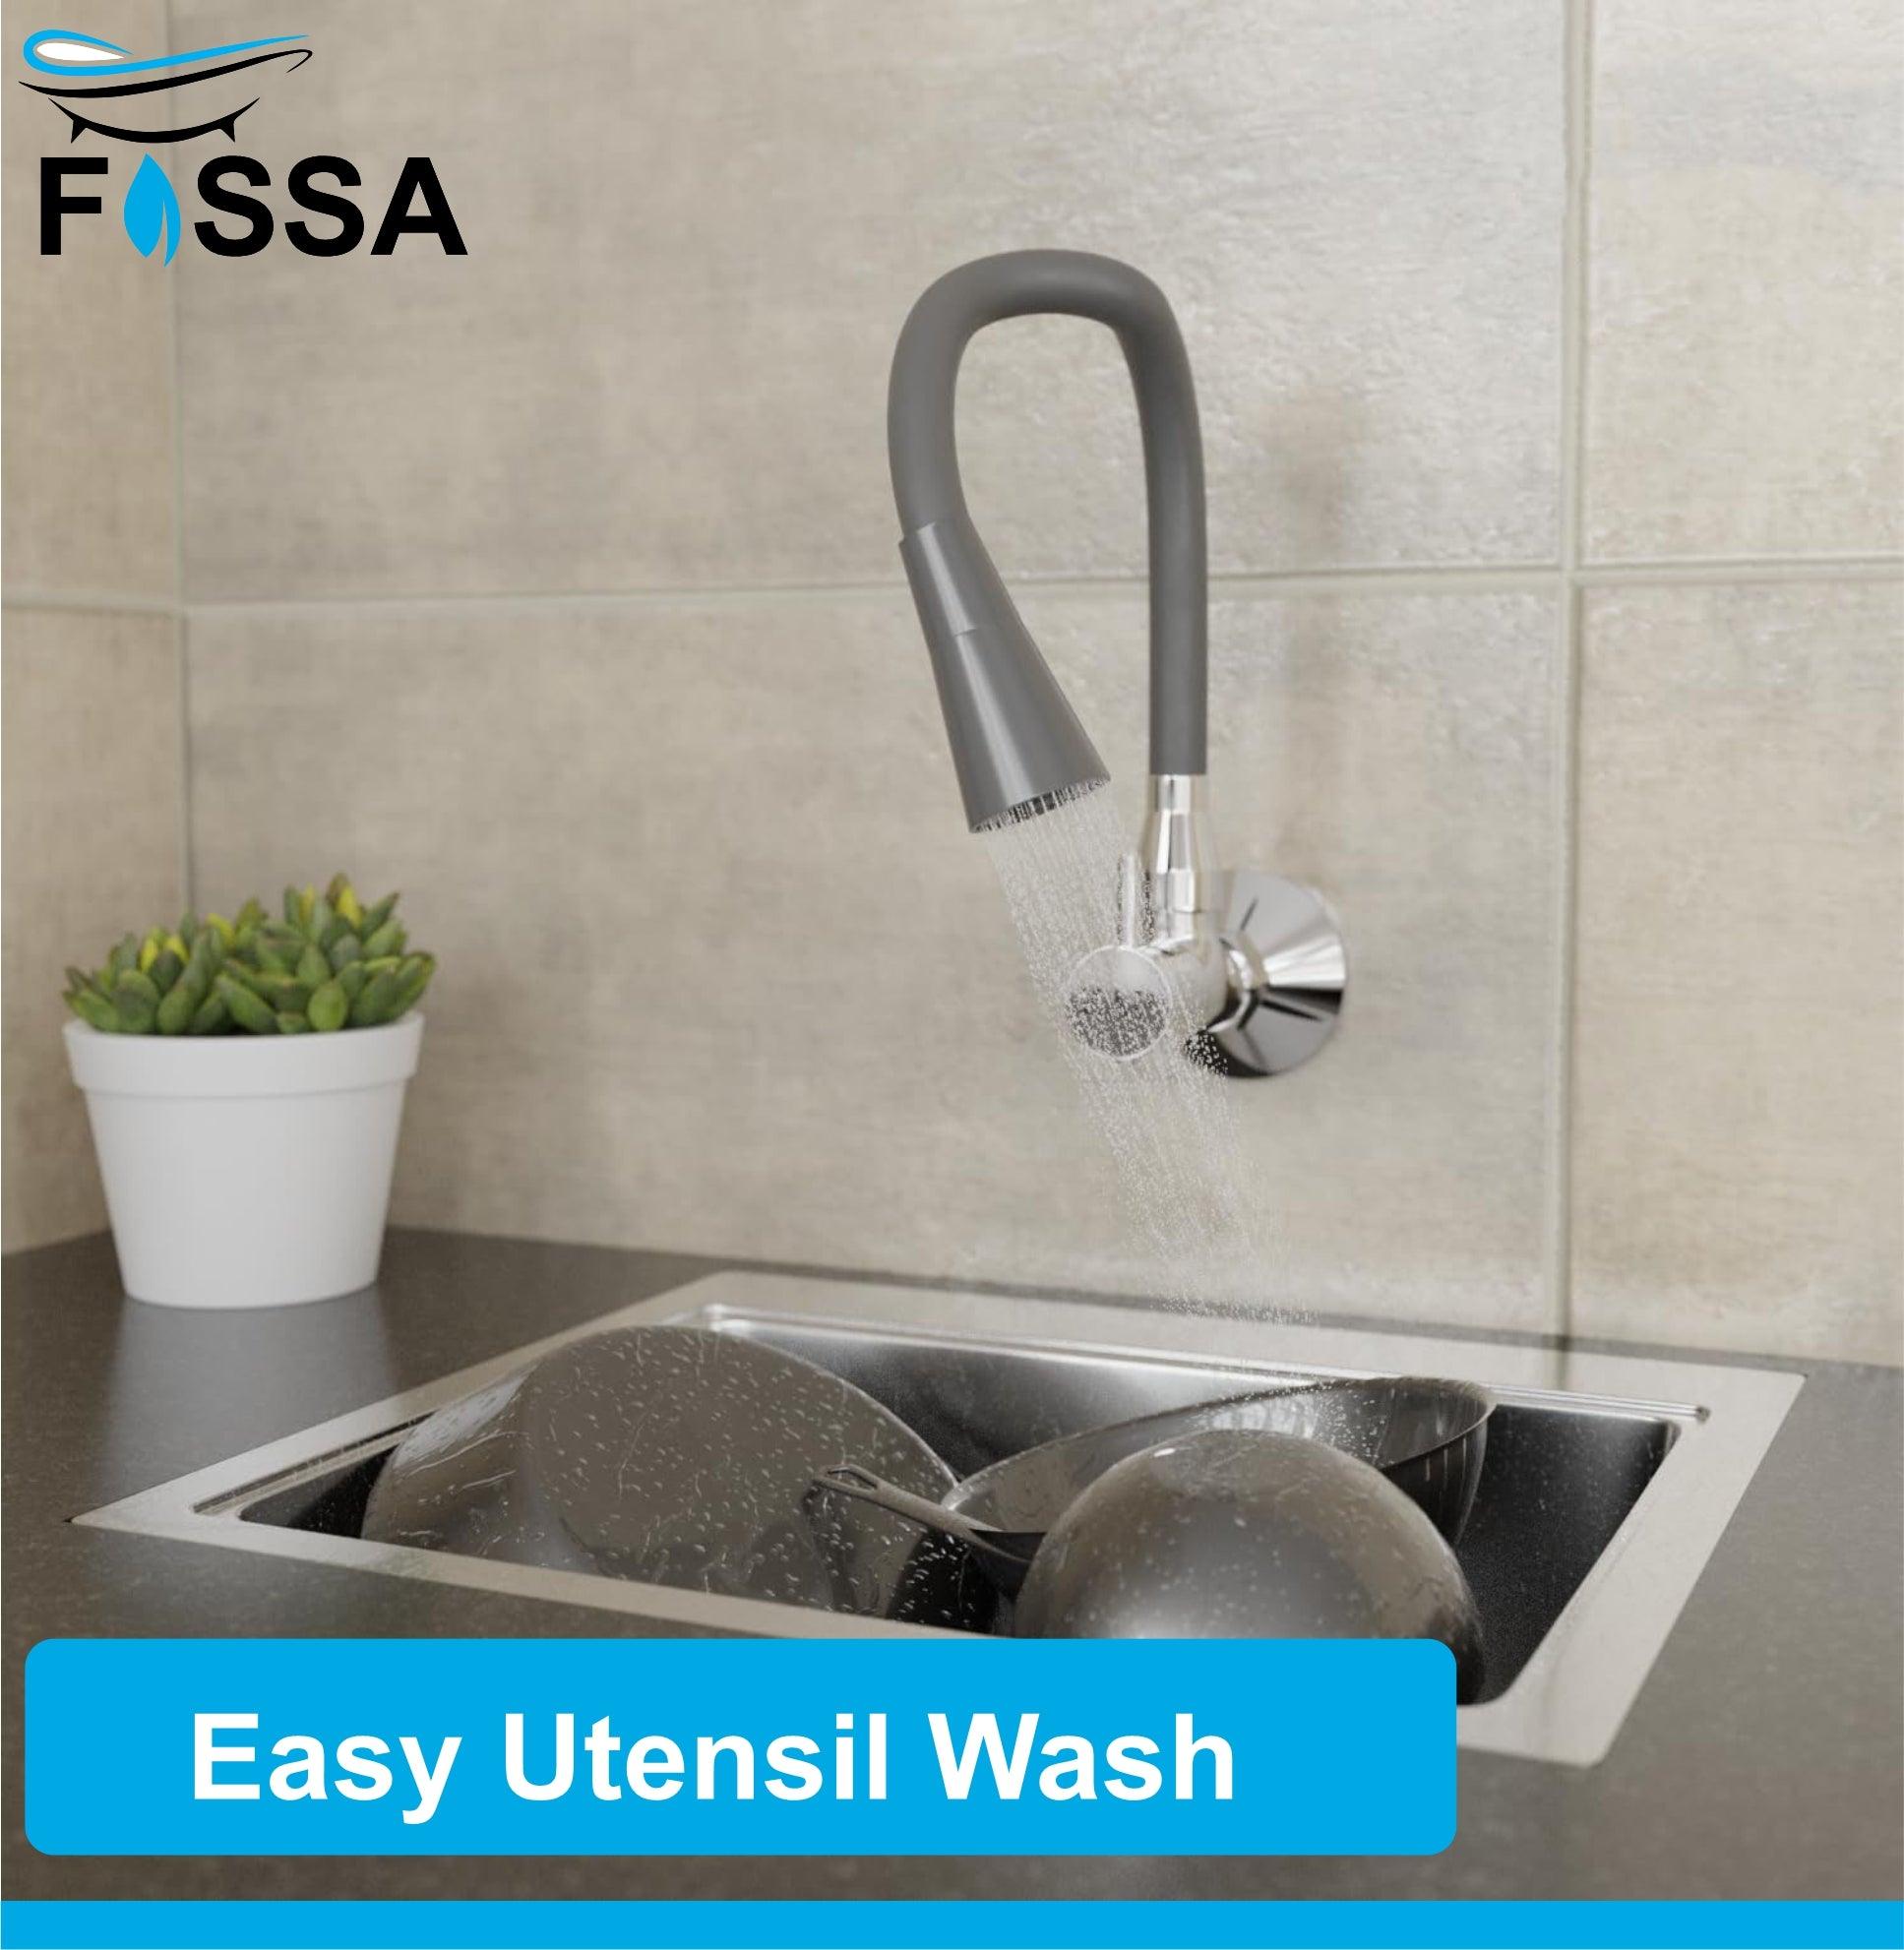 Fossa Brass Sink Cock with Dual Flow Kitchen Faucet with Flexible Swivel Spout (Grey) - Fossa Home 